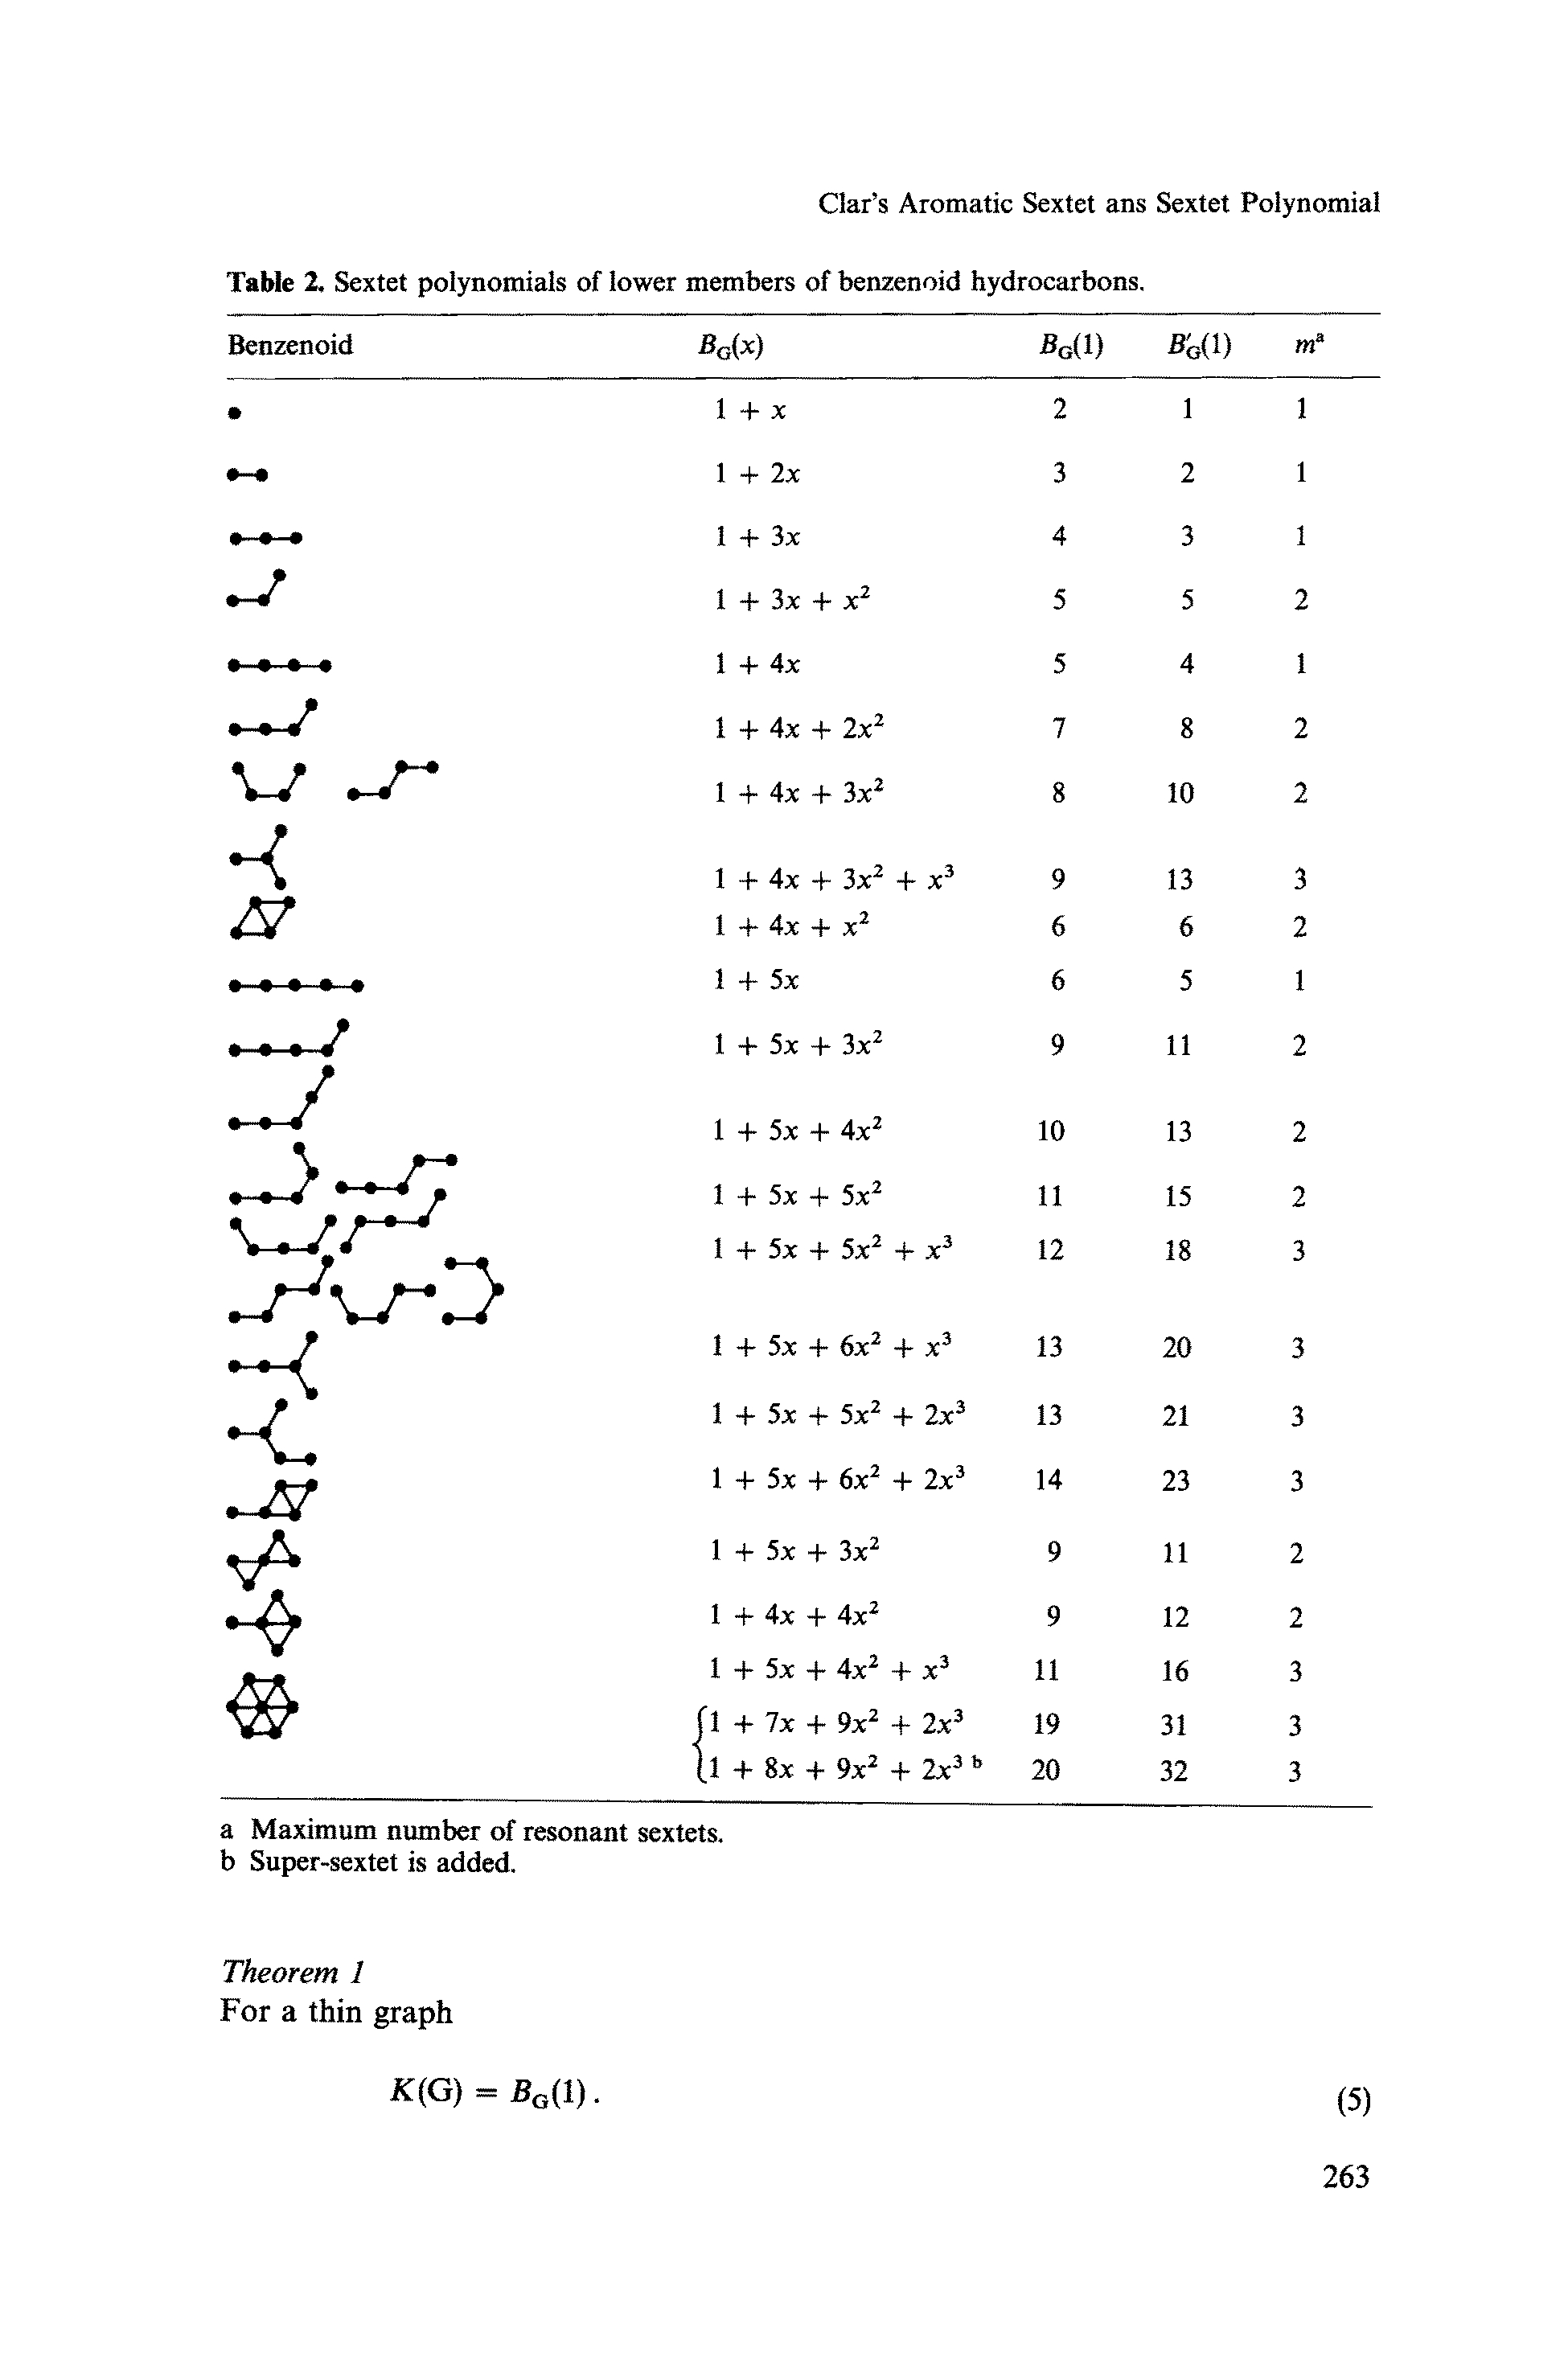 Table 2, Sextet polynomials of lower members of benzenoid hydrocarbons.